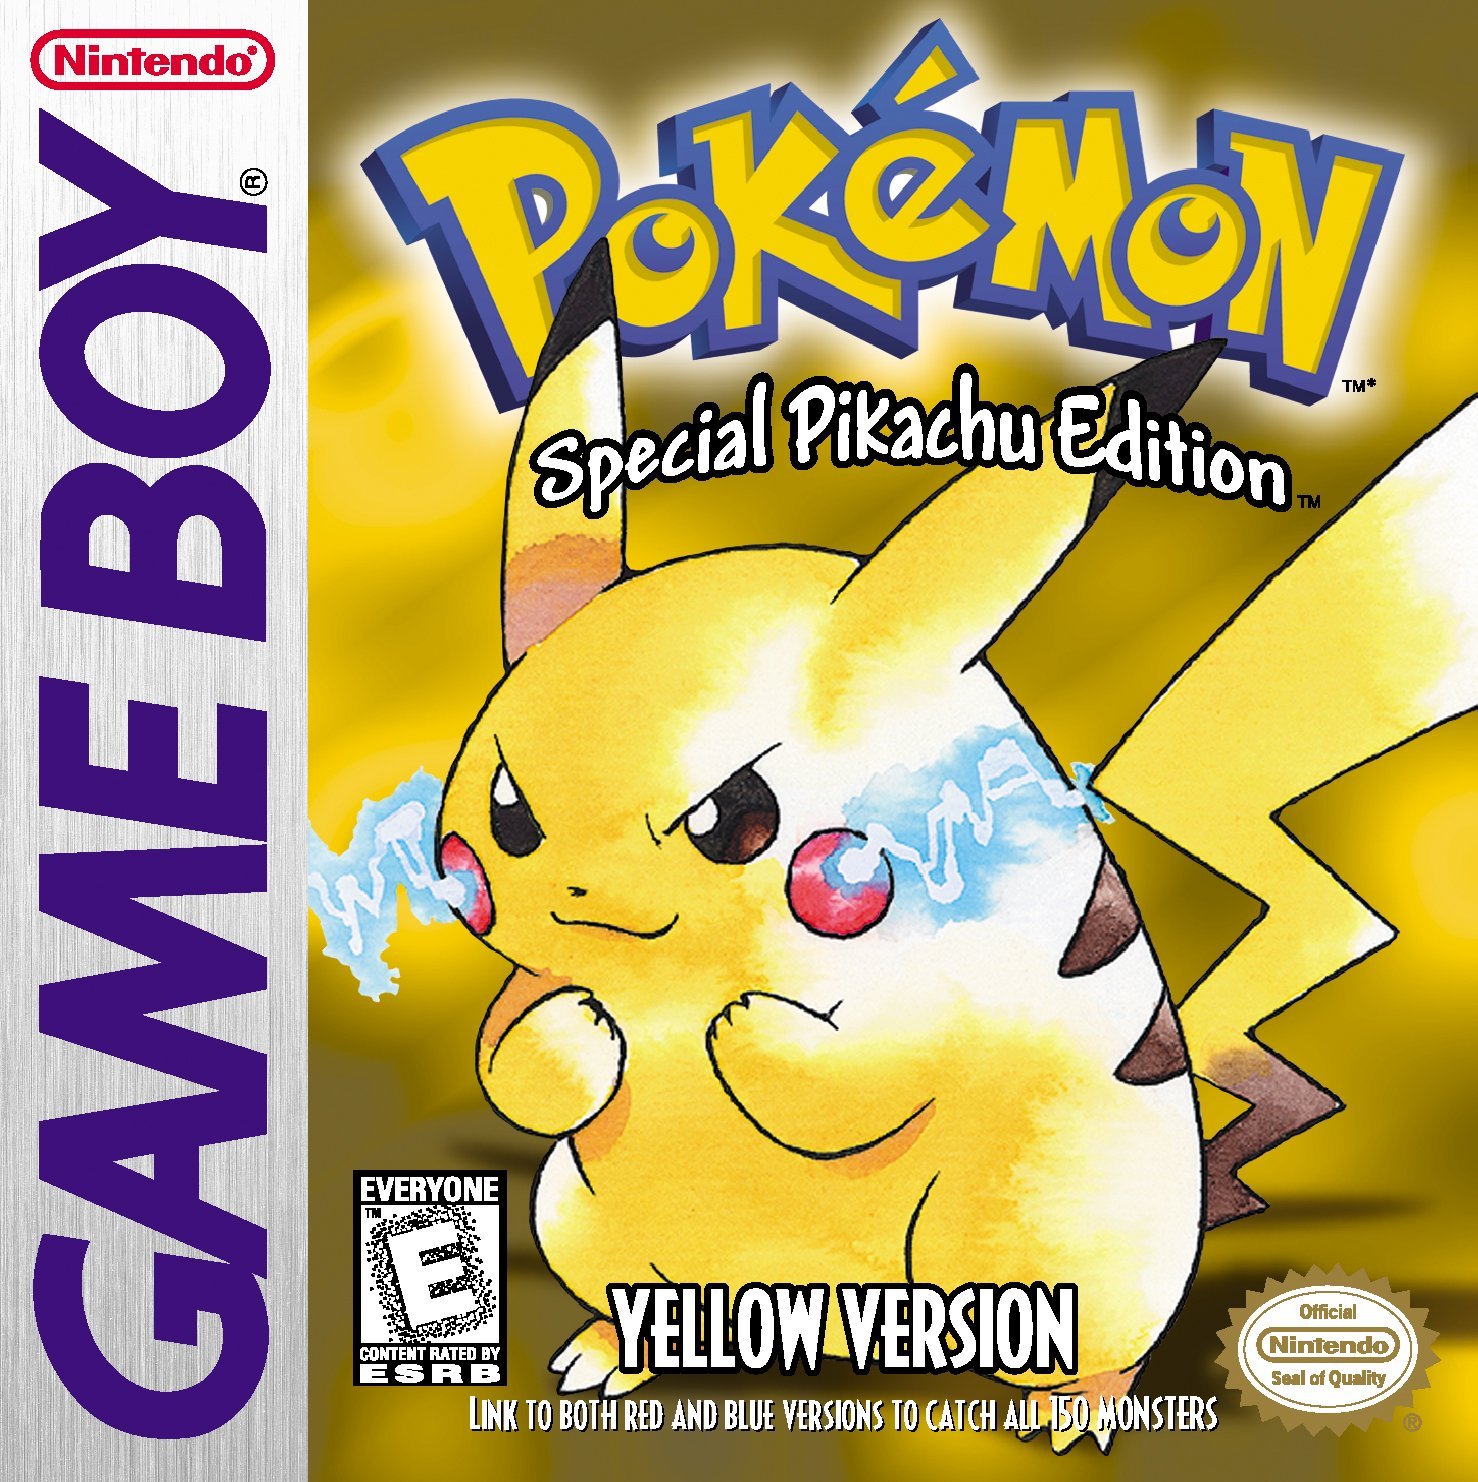 Are the Virtual Console versions of Pokemon Red, Blue and Yellow worth  buying on the 3DS eShop?